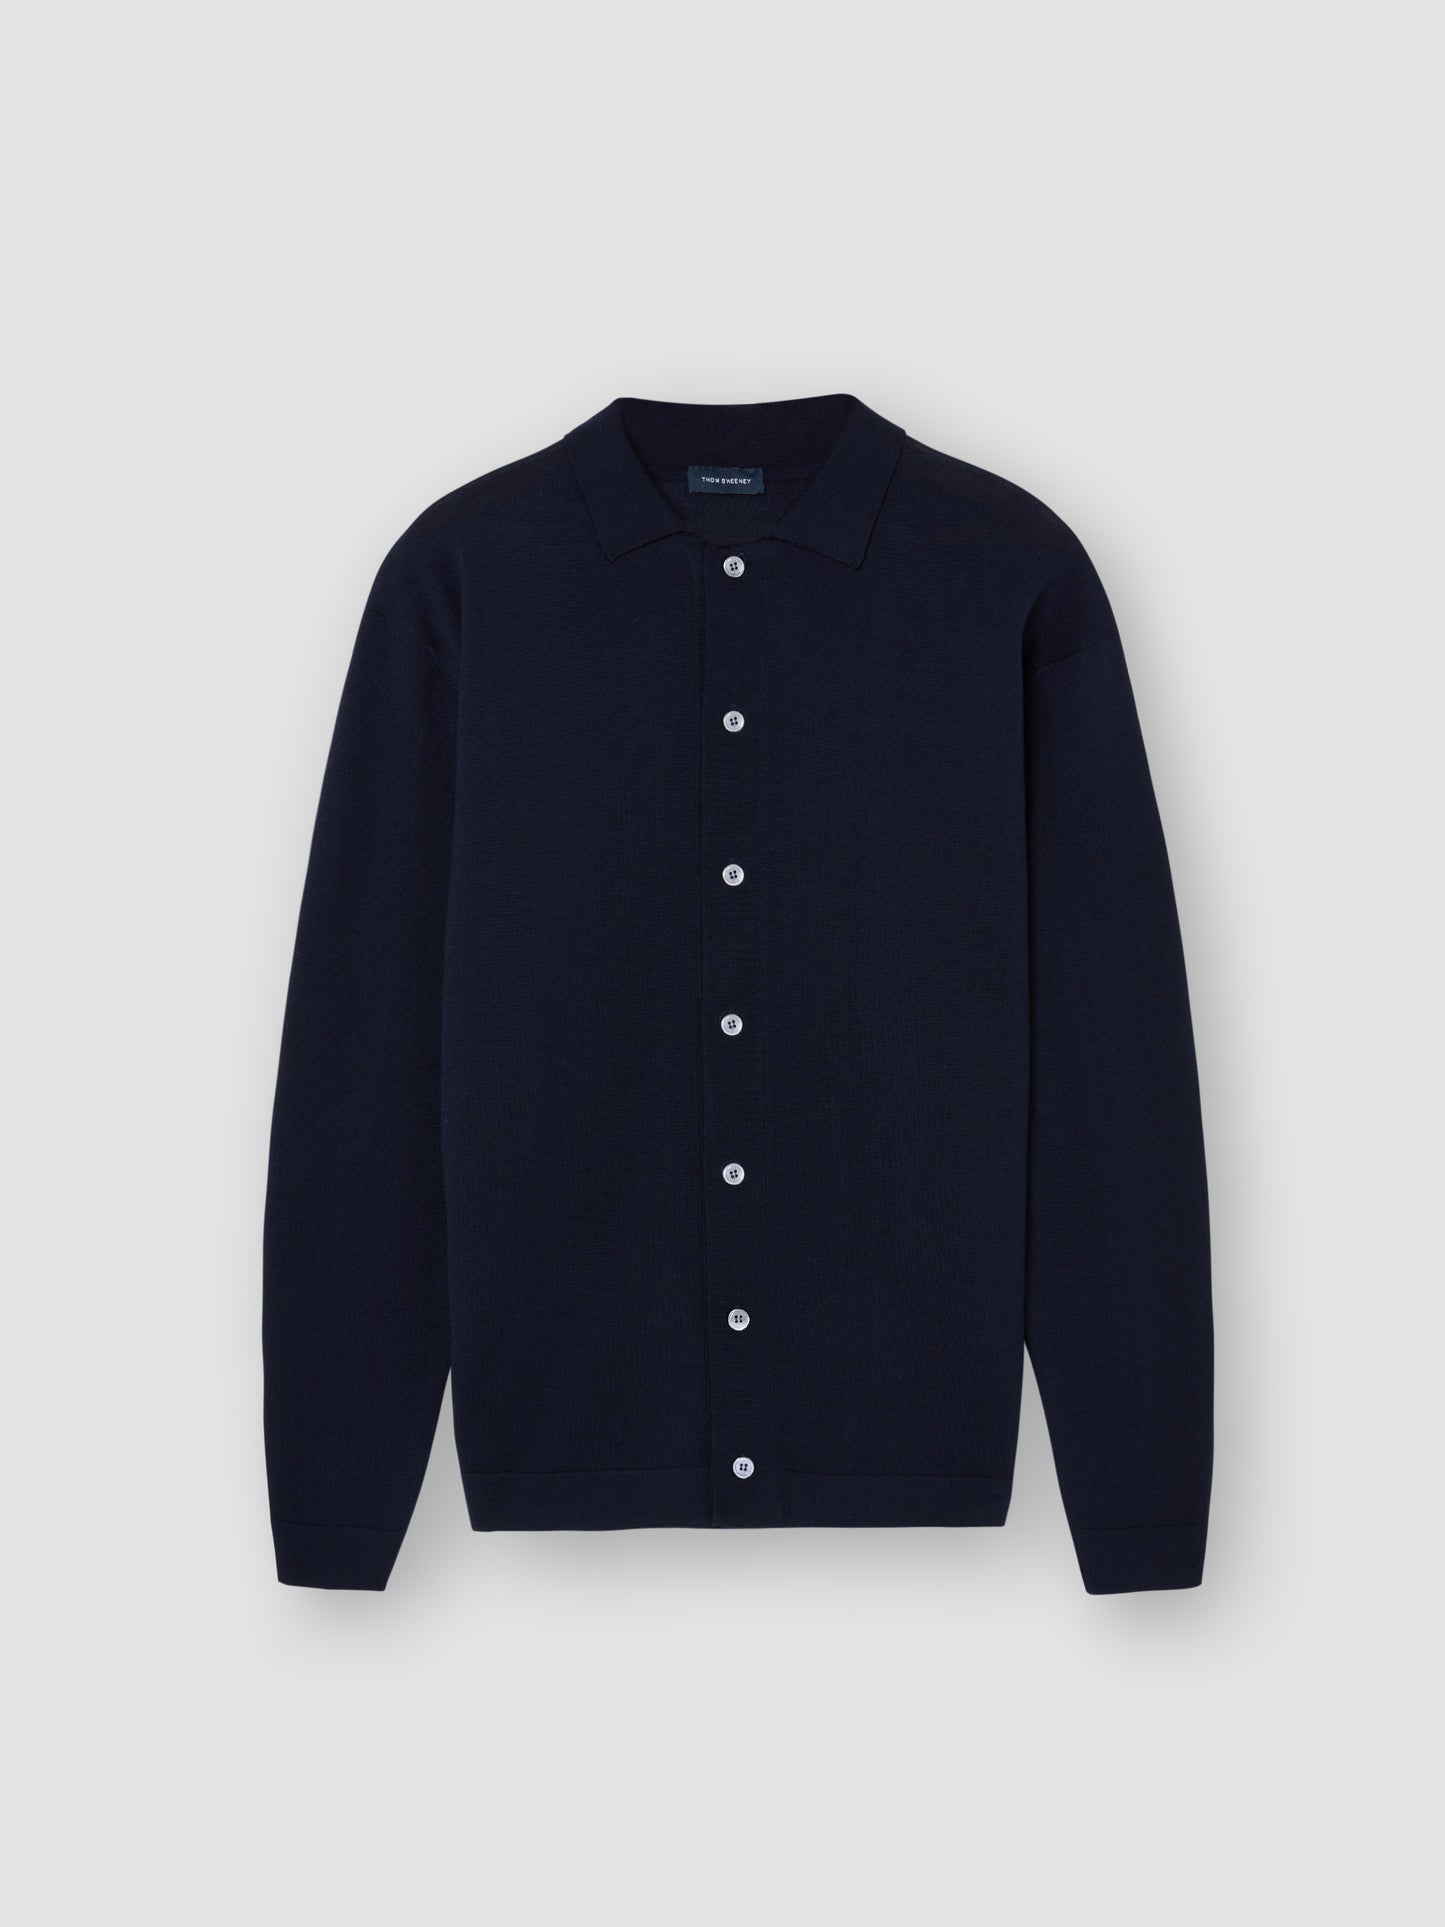 Merino Wool Extrafine Long Sleeve Button Through Polo Shirt Navy Product Image